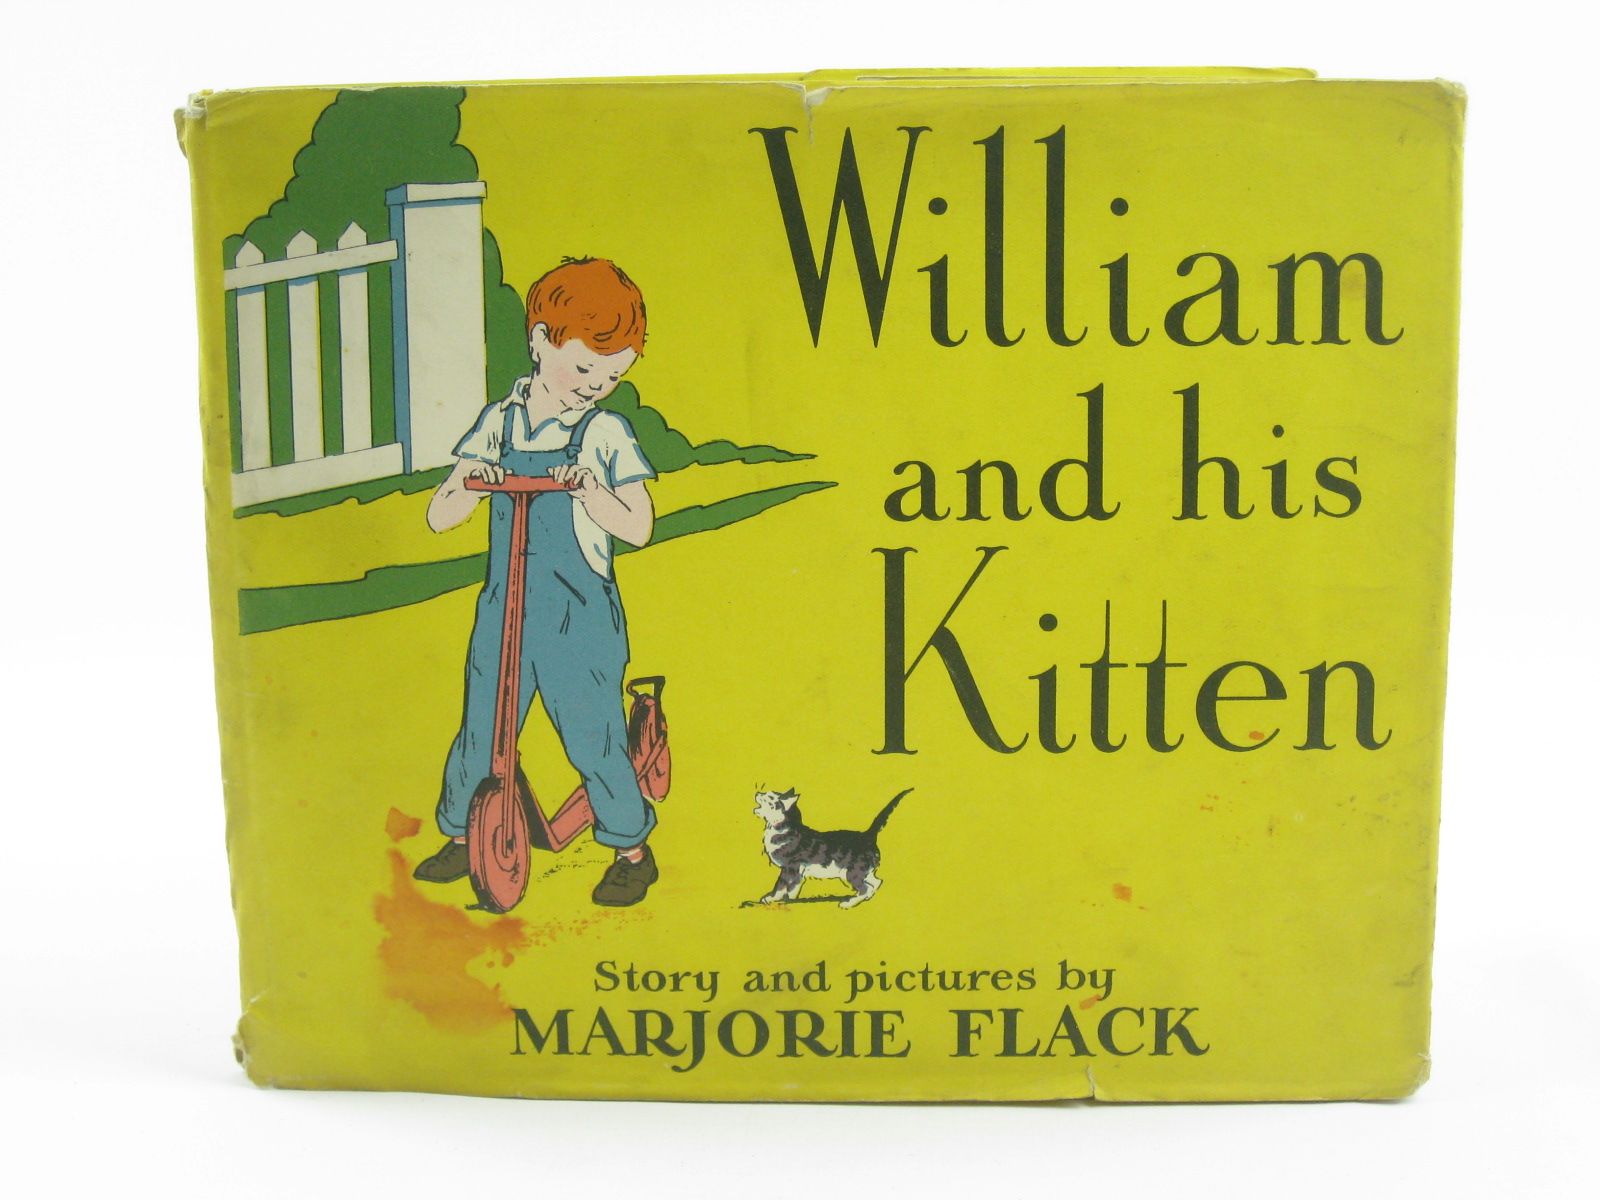 Photo of WILLIAM AND HIS KITTEN written by Flack, Marjorie illustrated by Flack, Marjorie published by John Lane The Bodley Head (STOCK CODE: 1310286)  for sale by Stella & Rose's Books